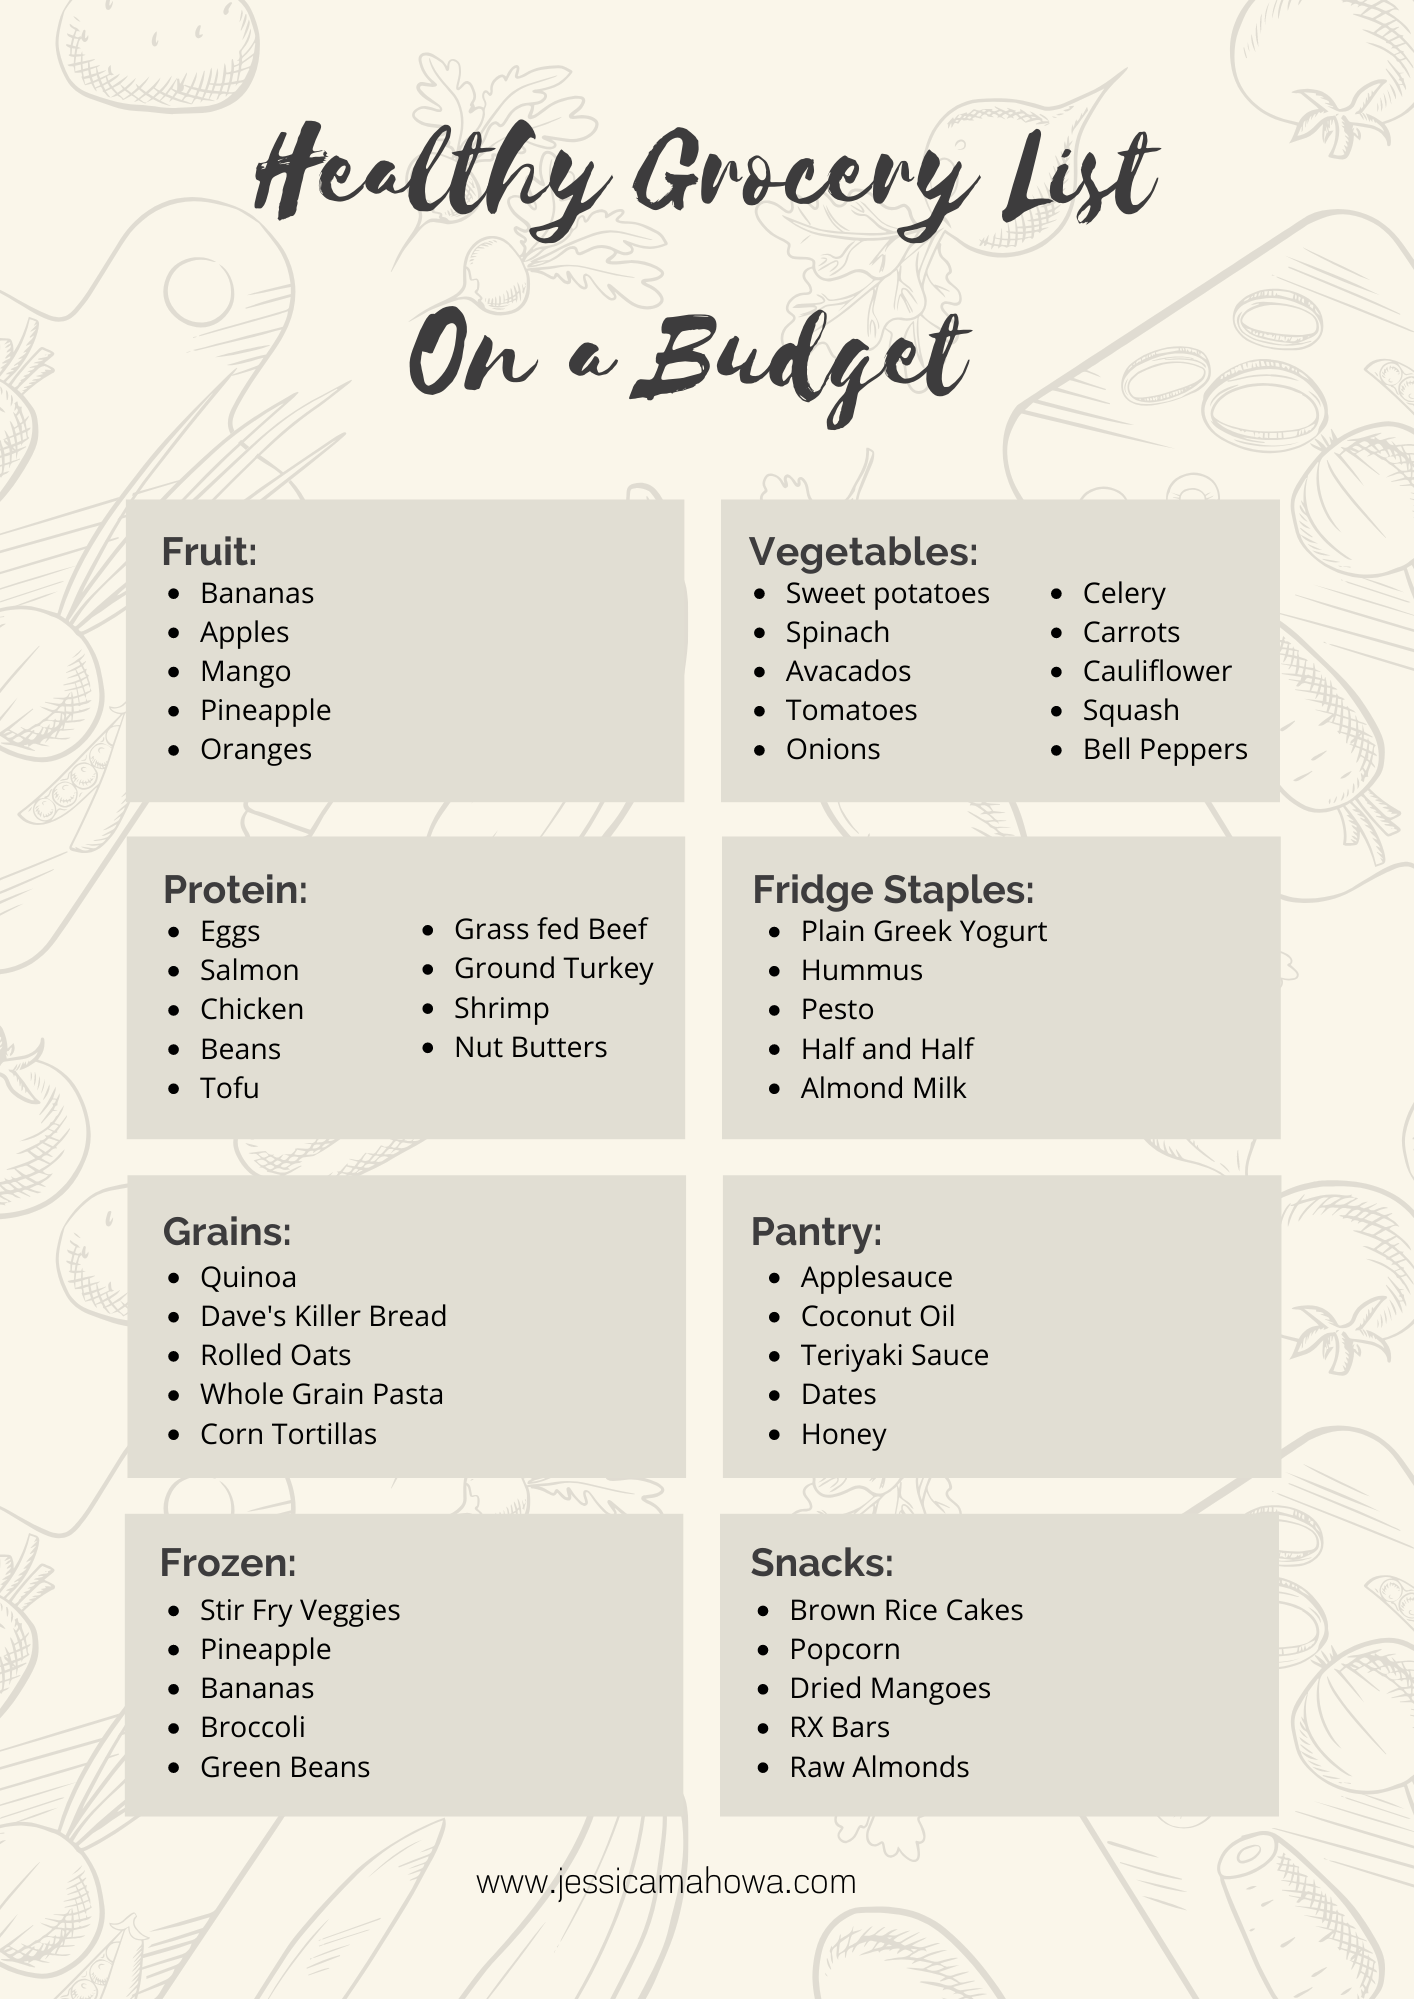 Healthy Grocery List On A Budget